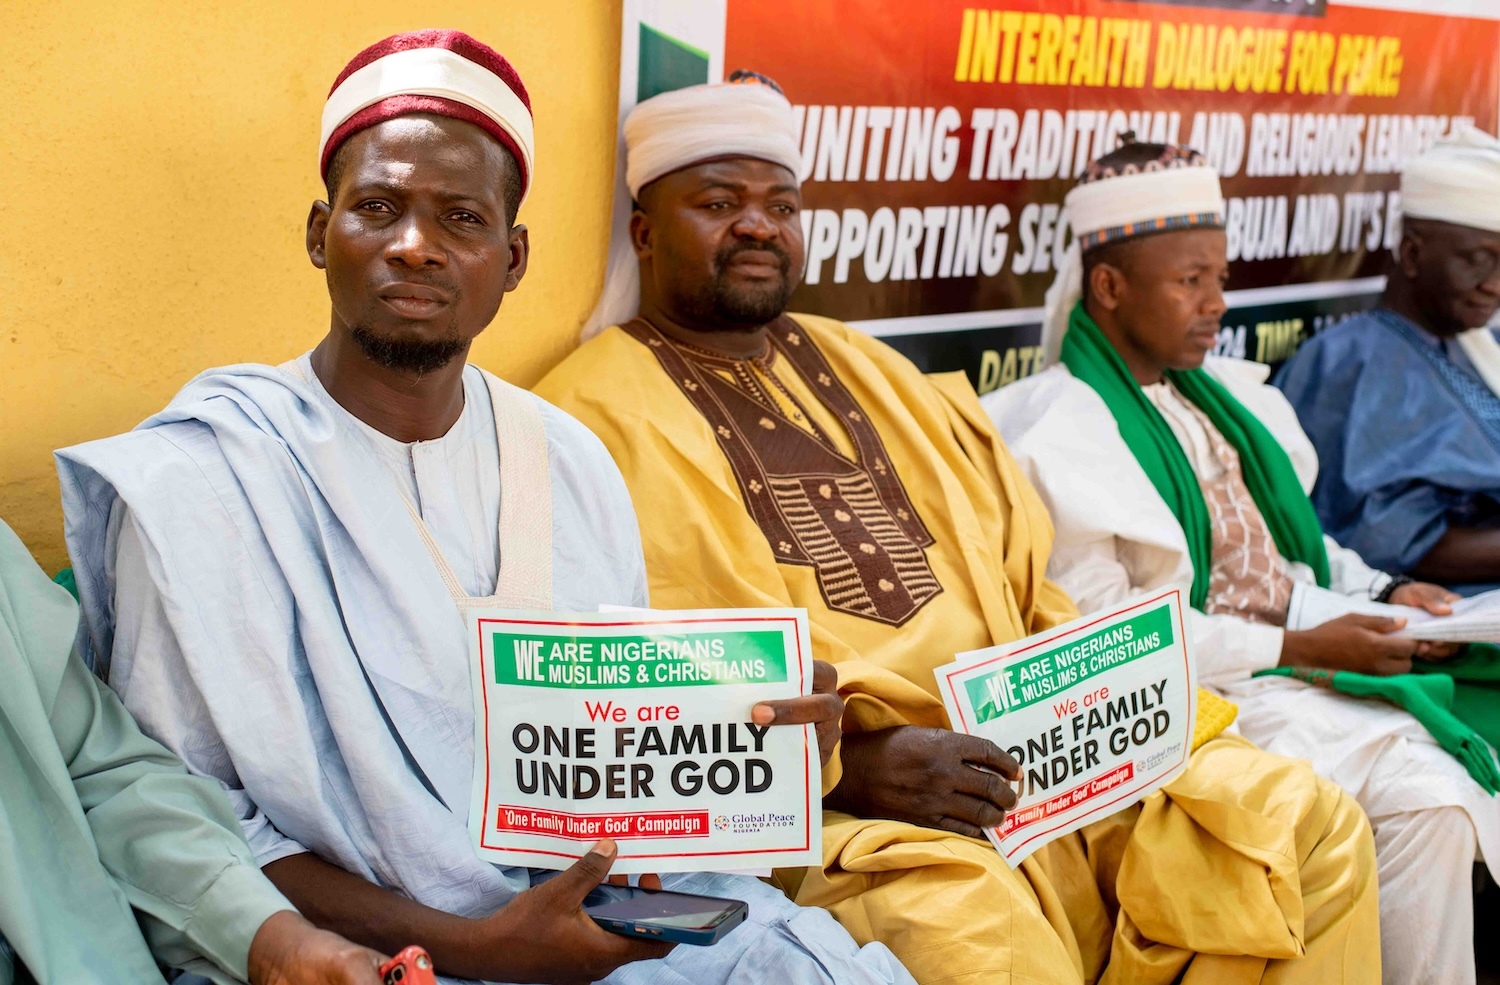 A group of men dressed in traditional attire hold signs reading "We are Nigerians, Muslims & Christians, We are one family under God" at an interfaith Community Dialogue event in Abuja aimed at promoting sustainable peace.